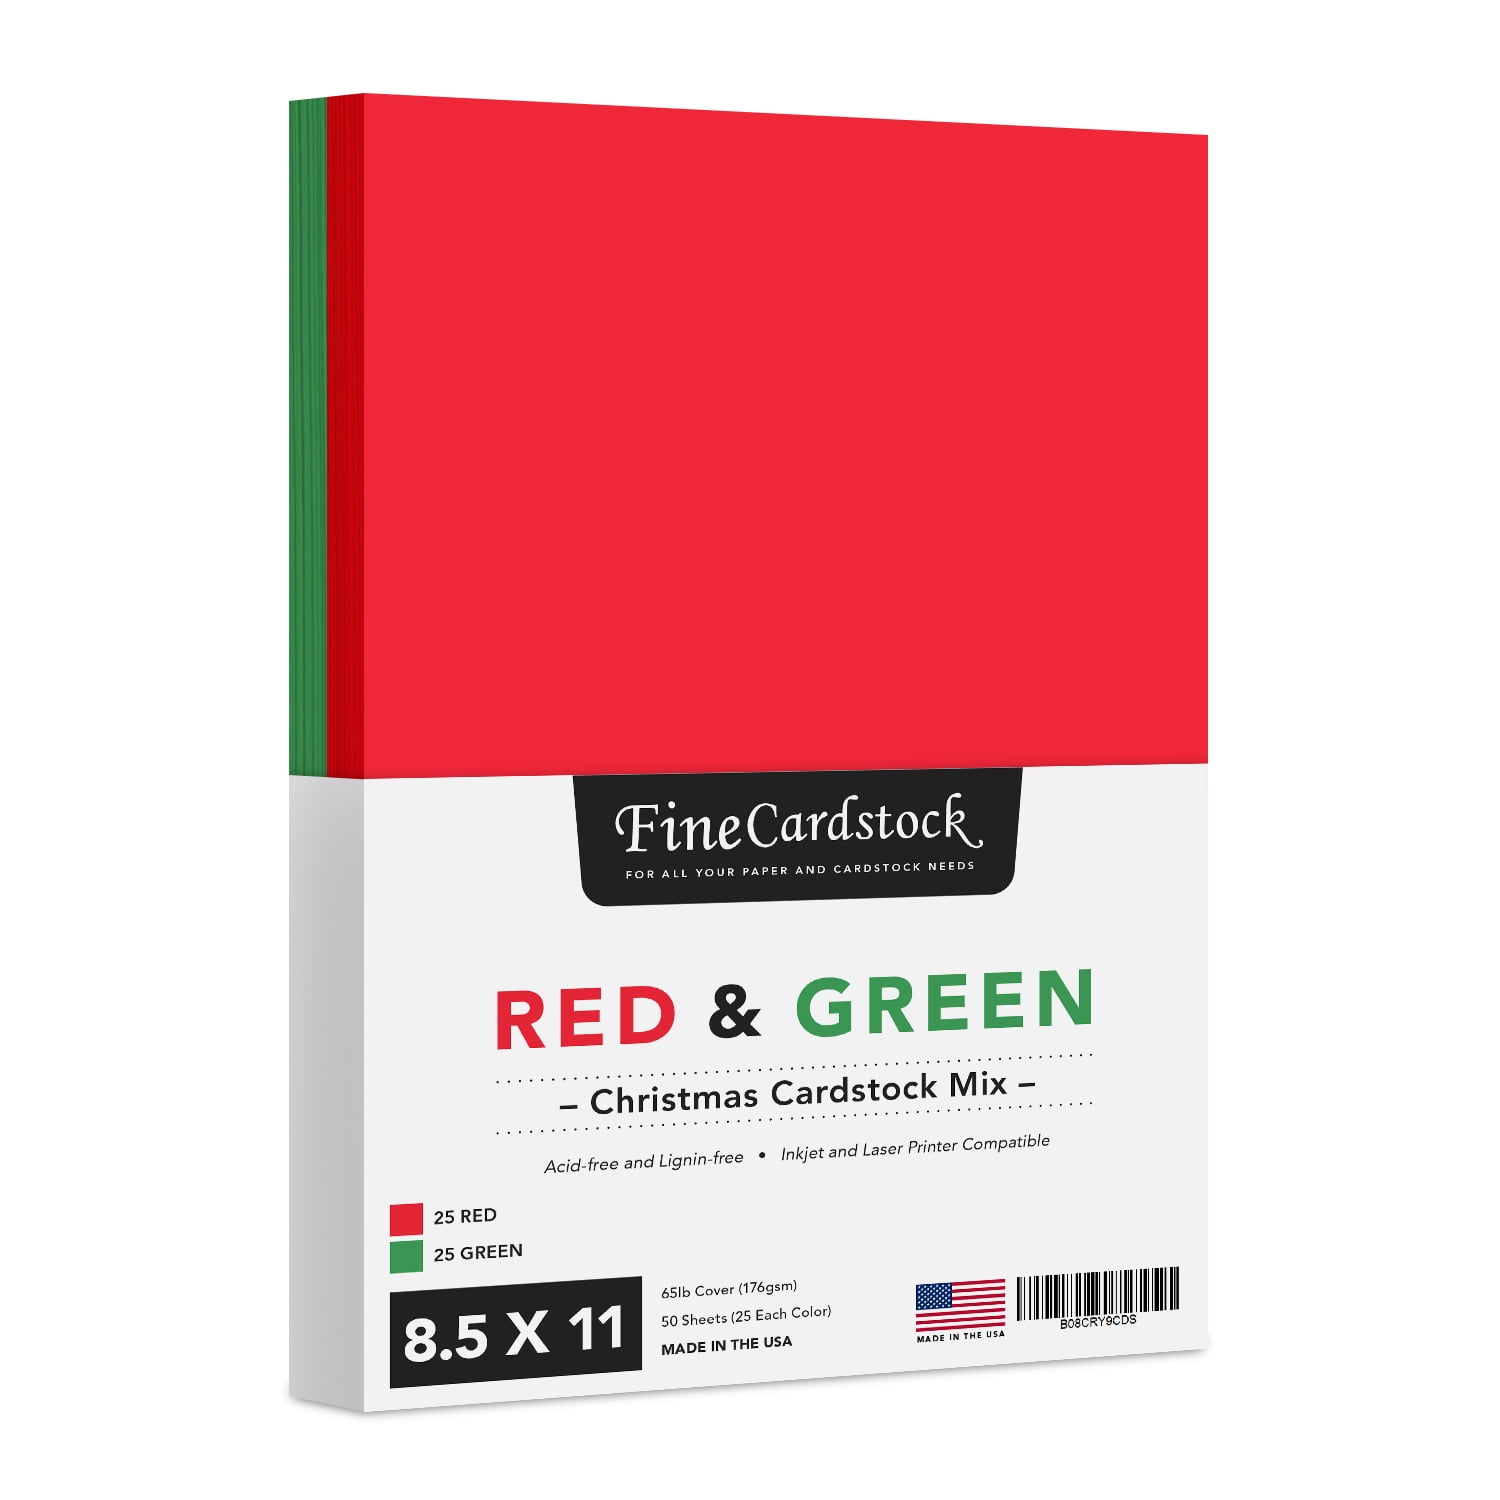  Gondiane 24 sheets Red Cardstock Paper 8.5 x 11